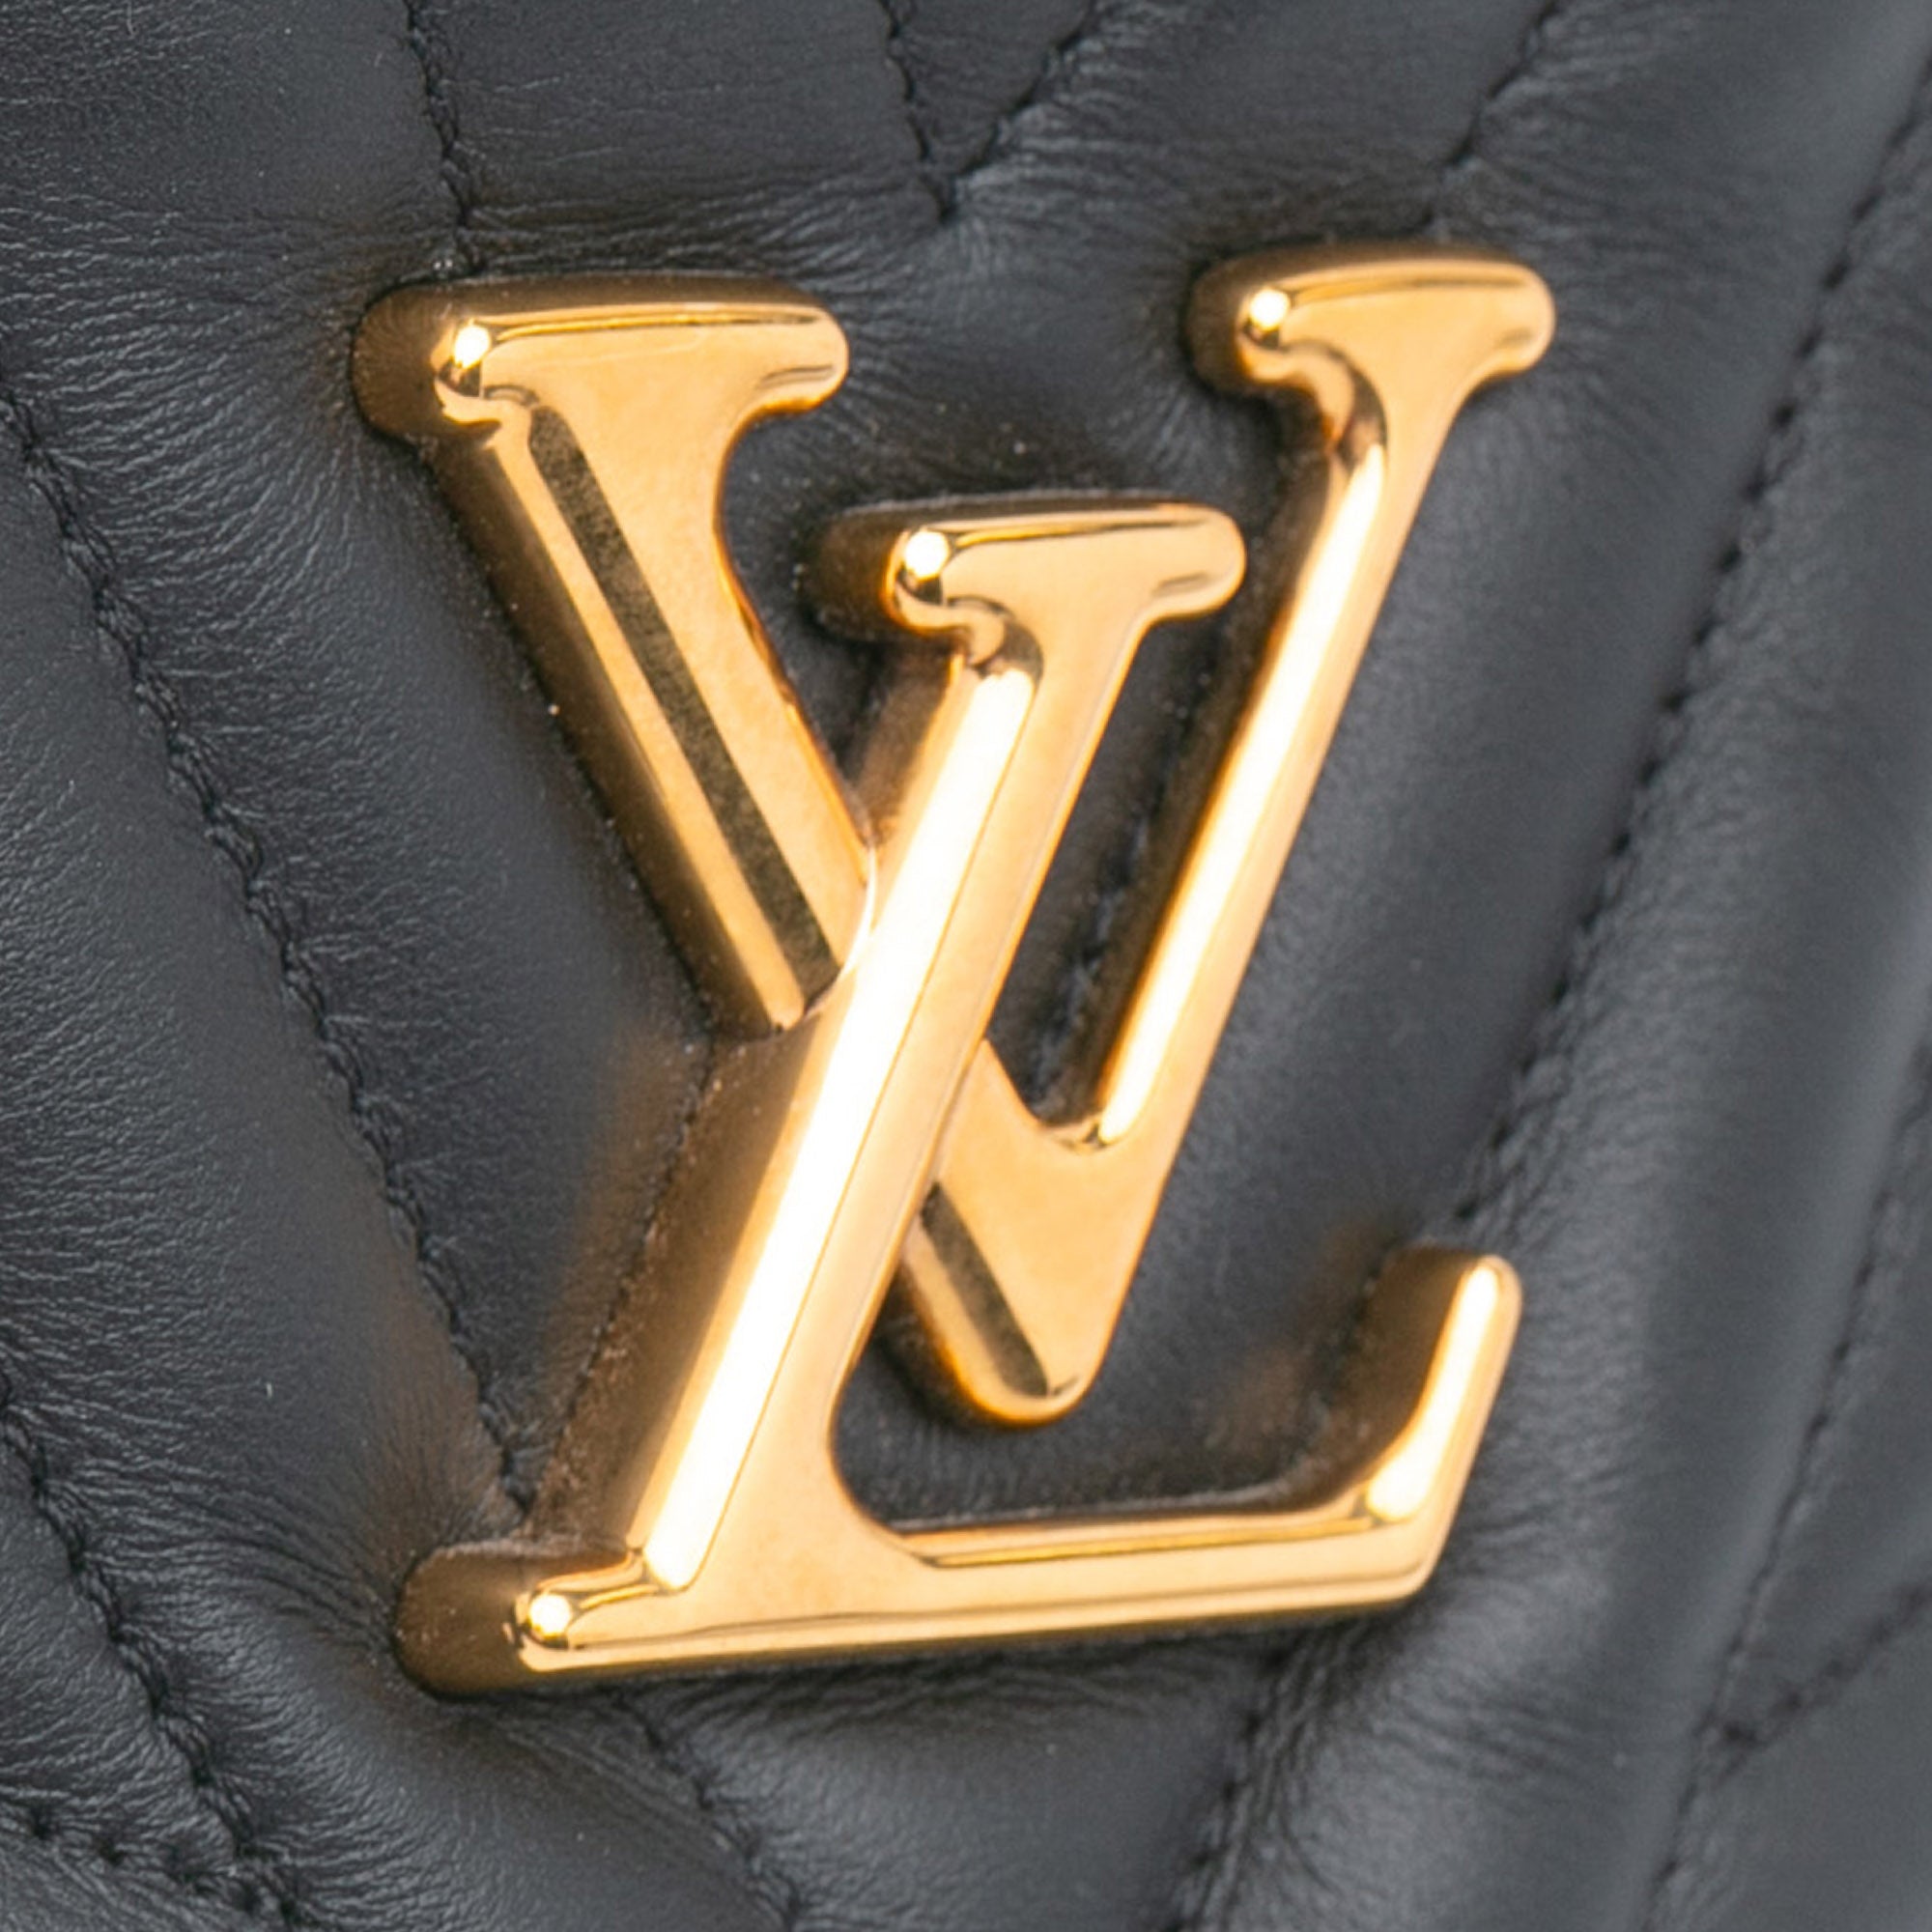 Louis Vuitton New Wave Bumbag Black in Calf Leather with Gold-tone - US